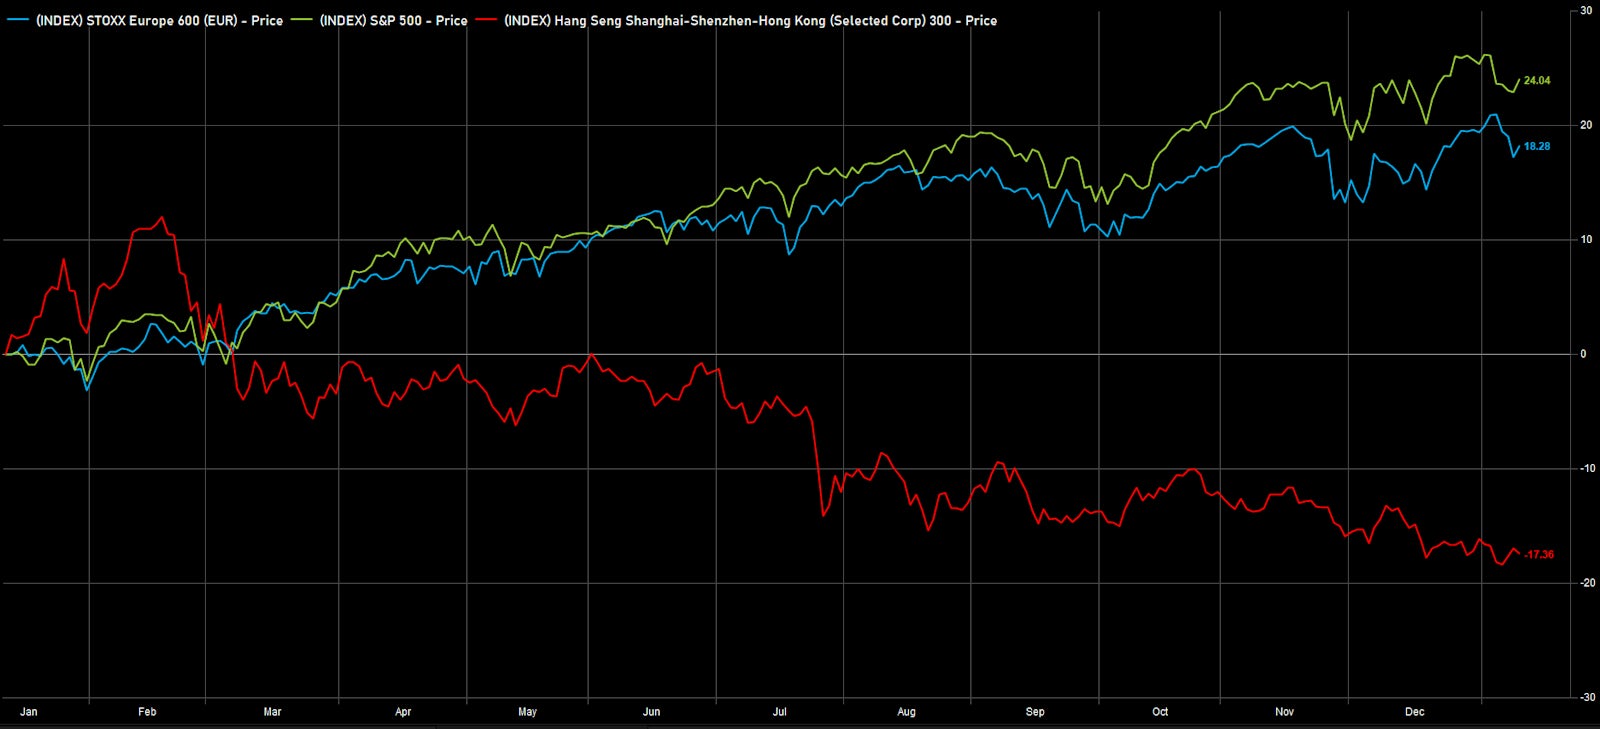 Comparison of the recent price performance of US, European, Chinese Equities | Source: FactSet